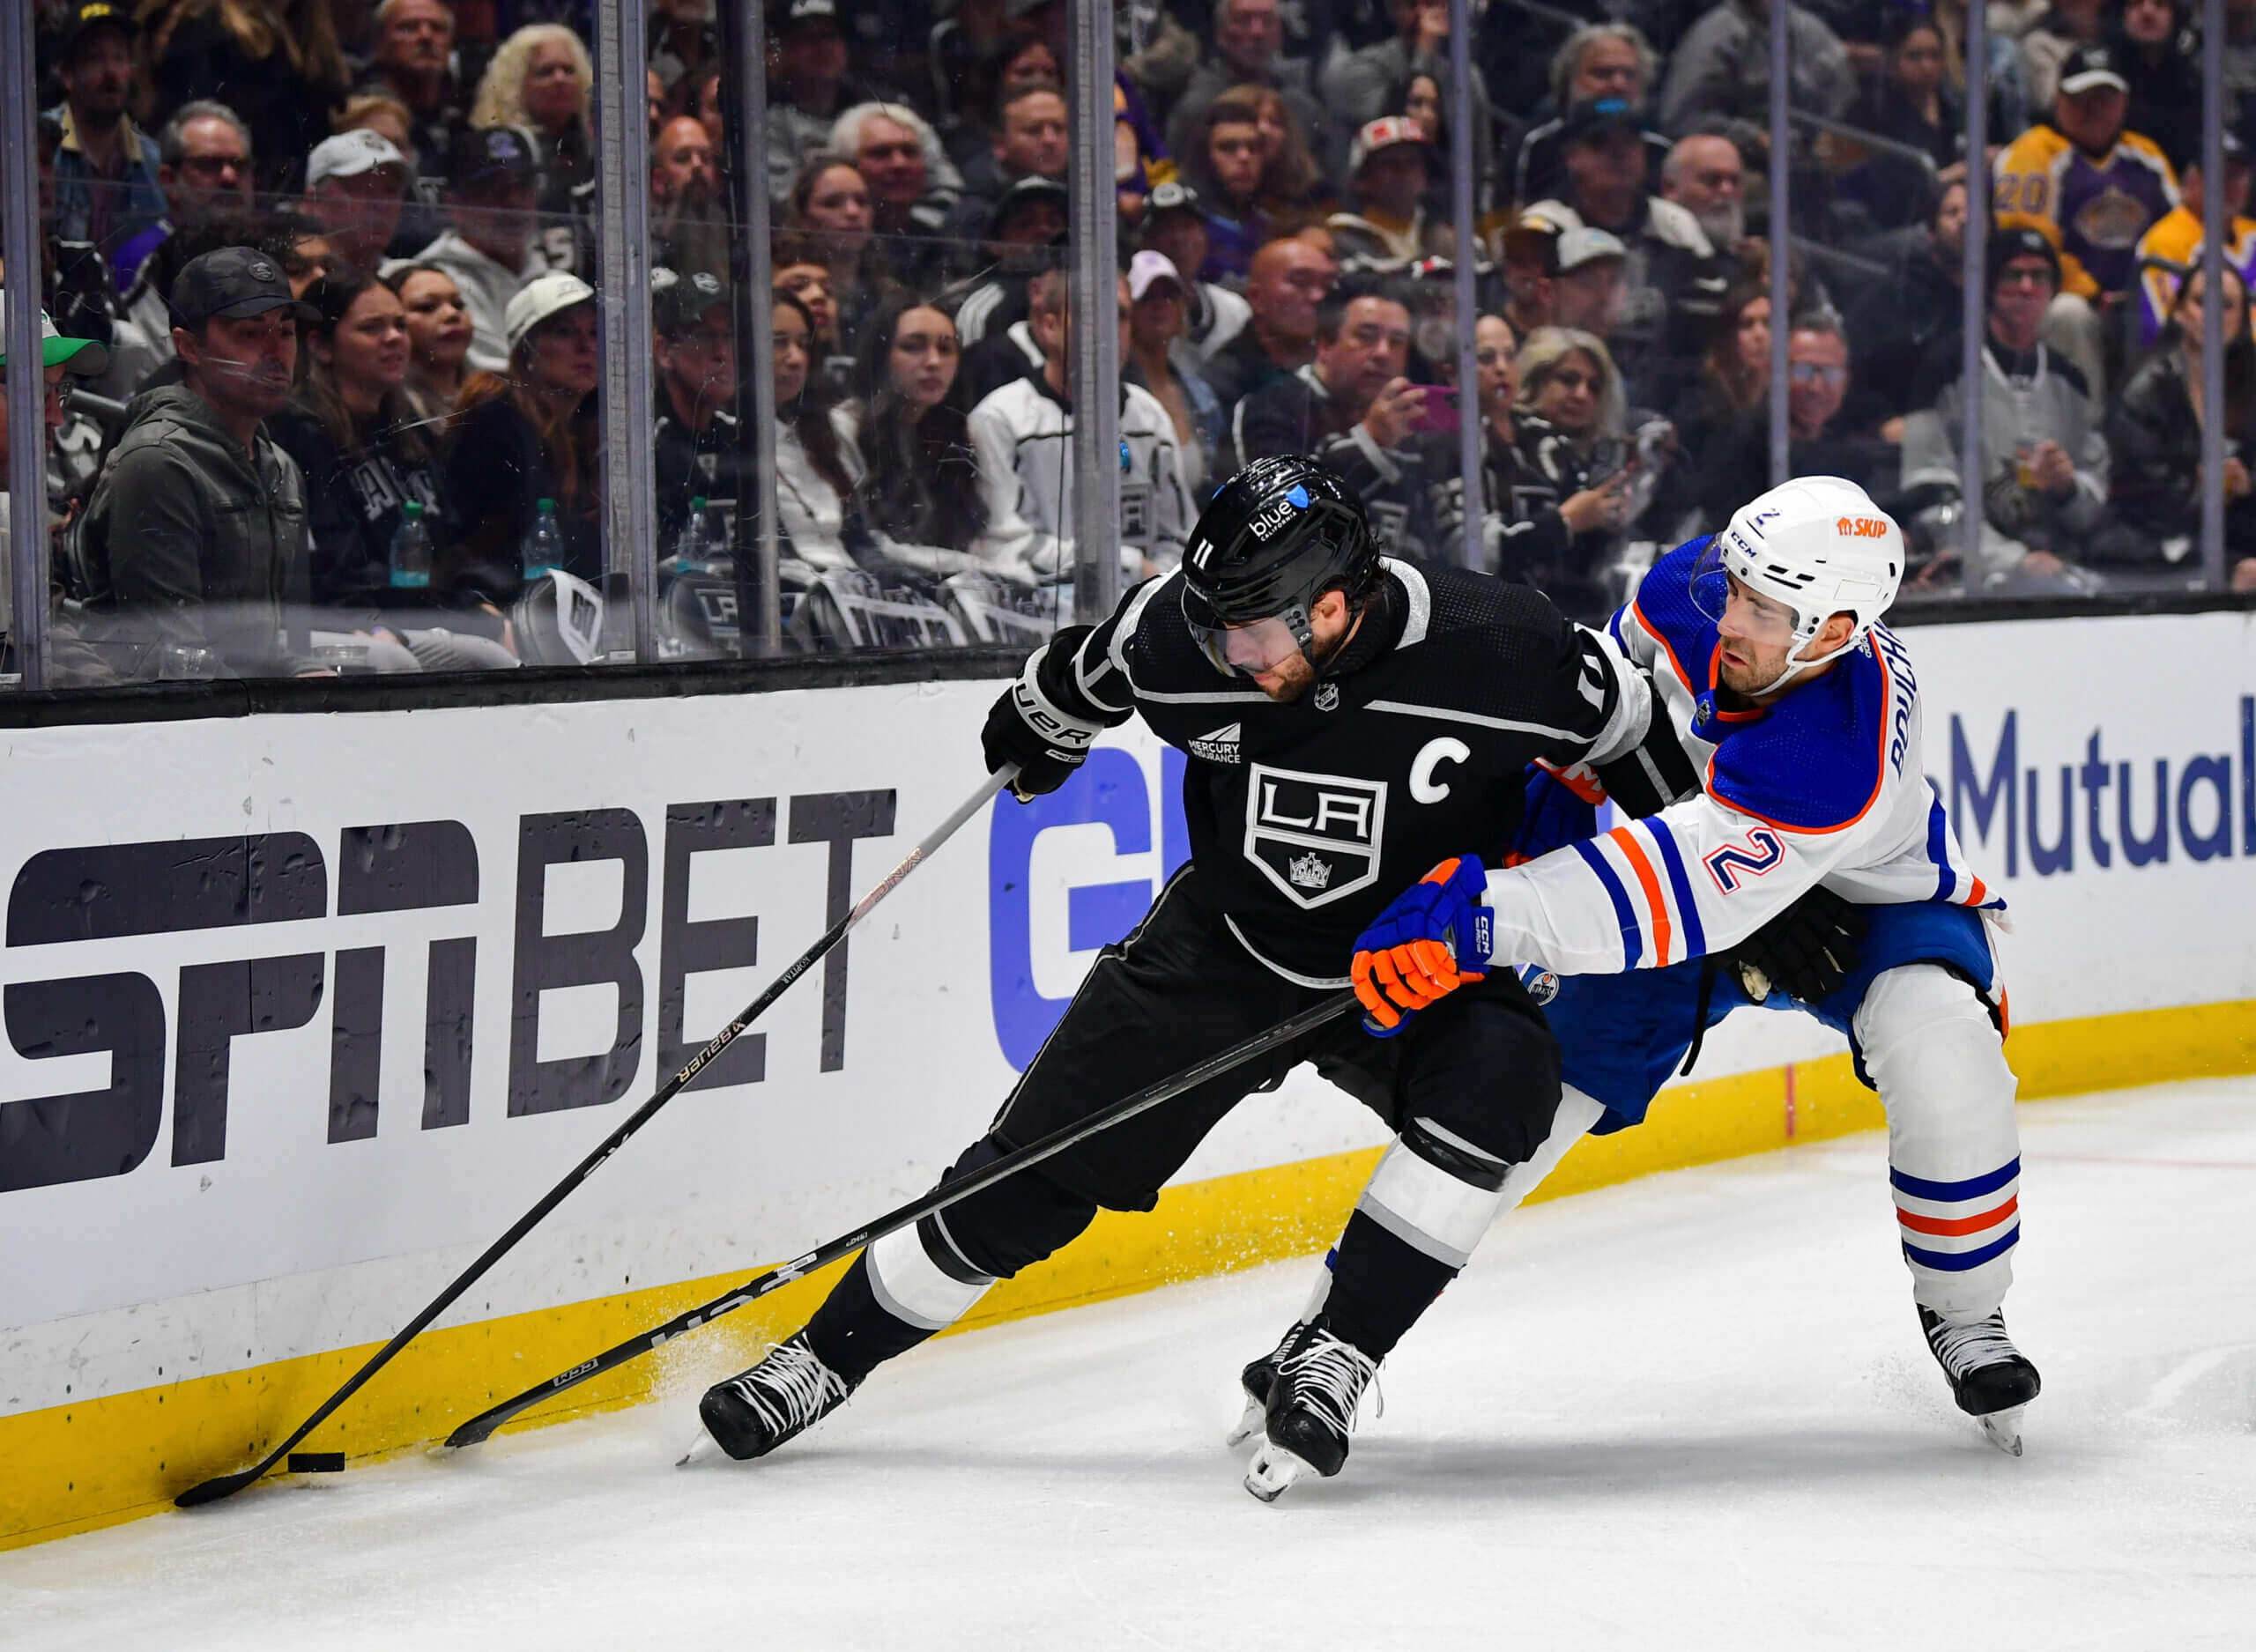 Kings ‘not going to stress’ about power play, even as it’s costing them dearly vs. Oilers